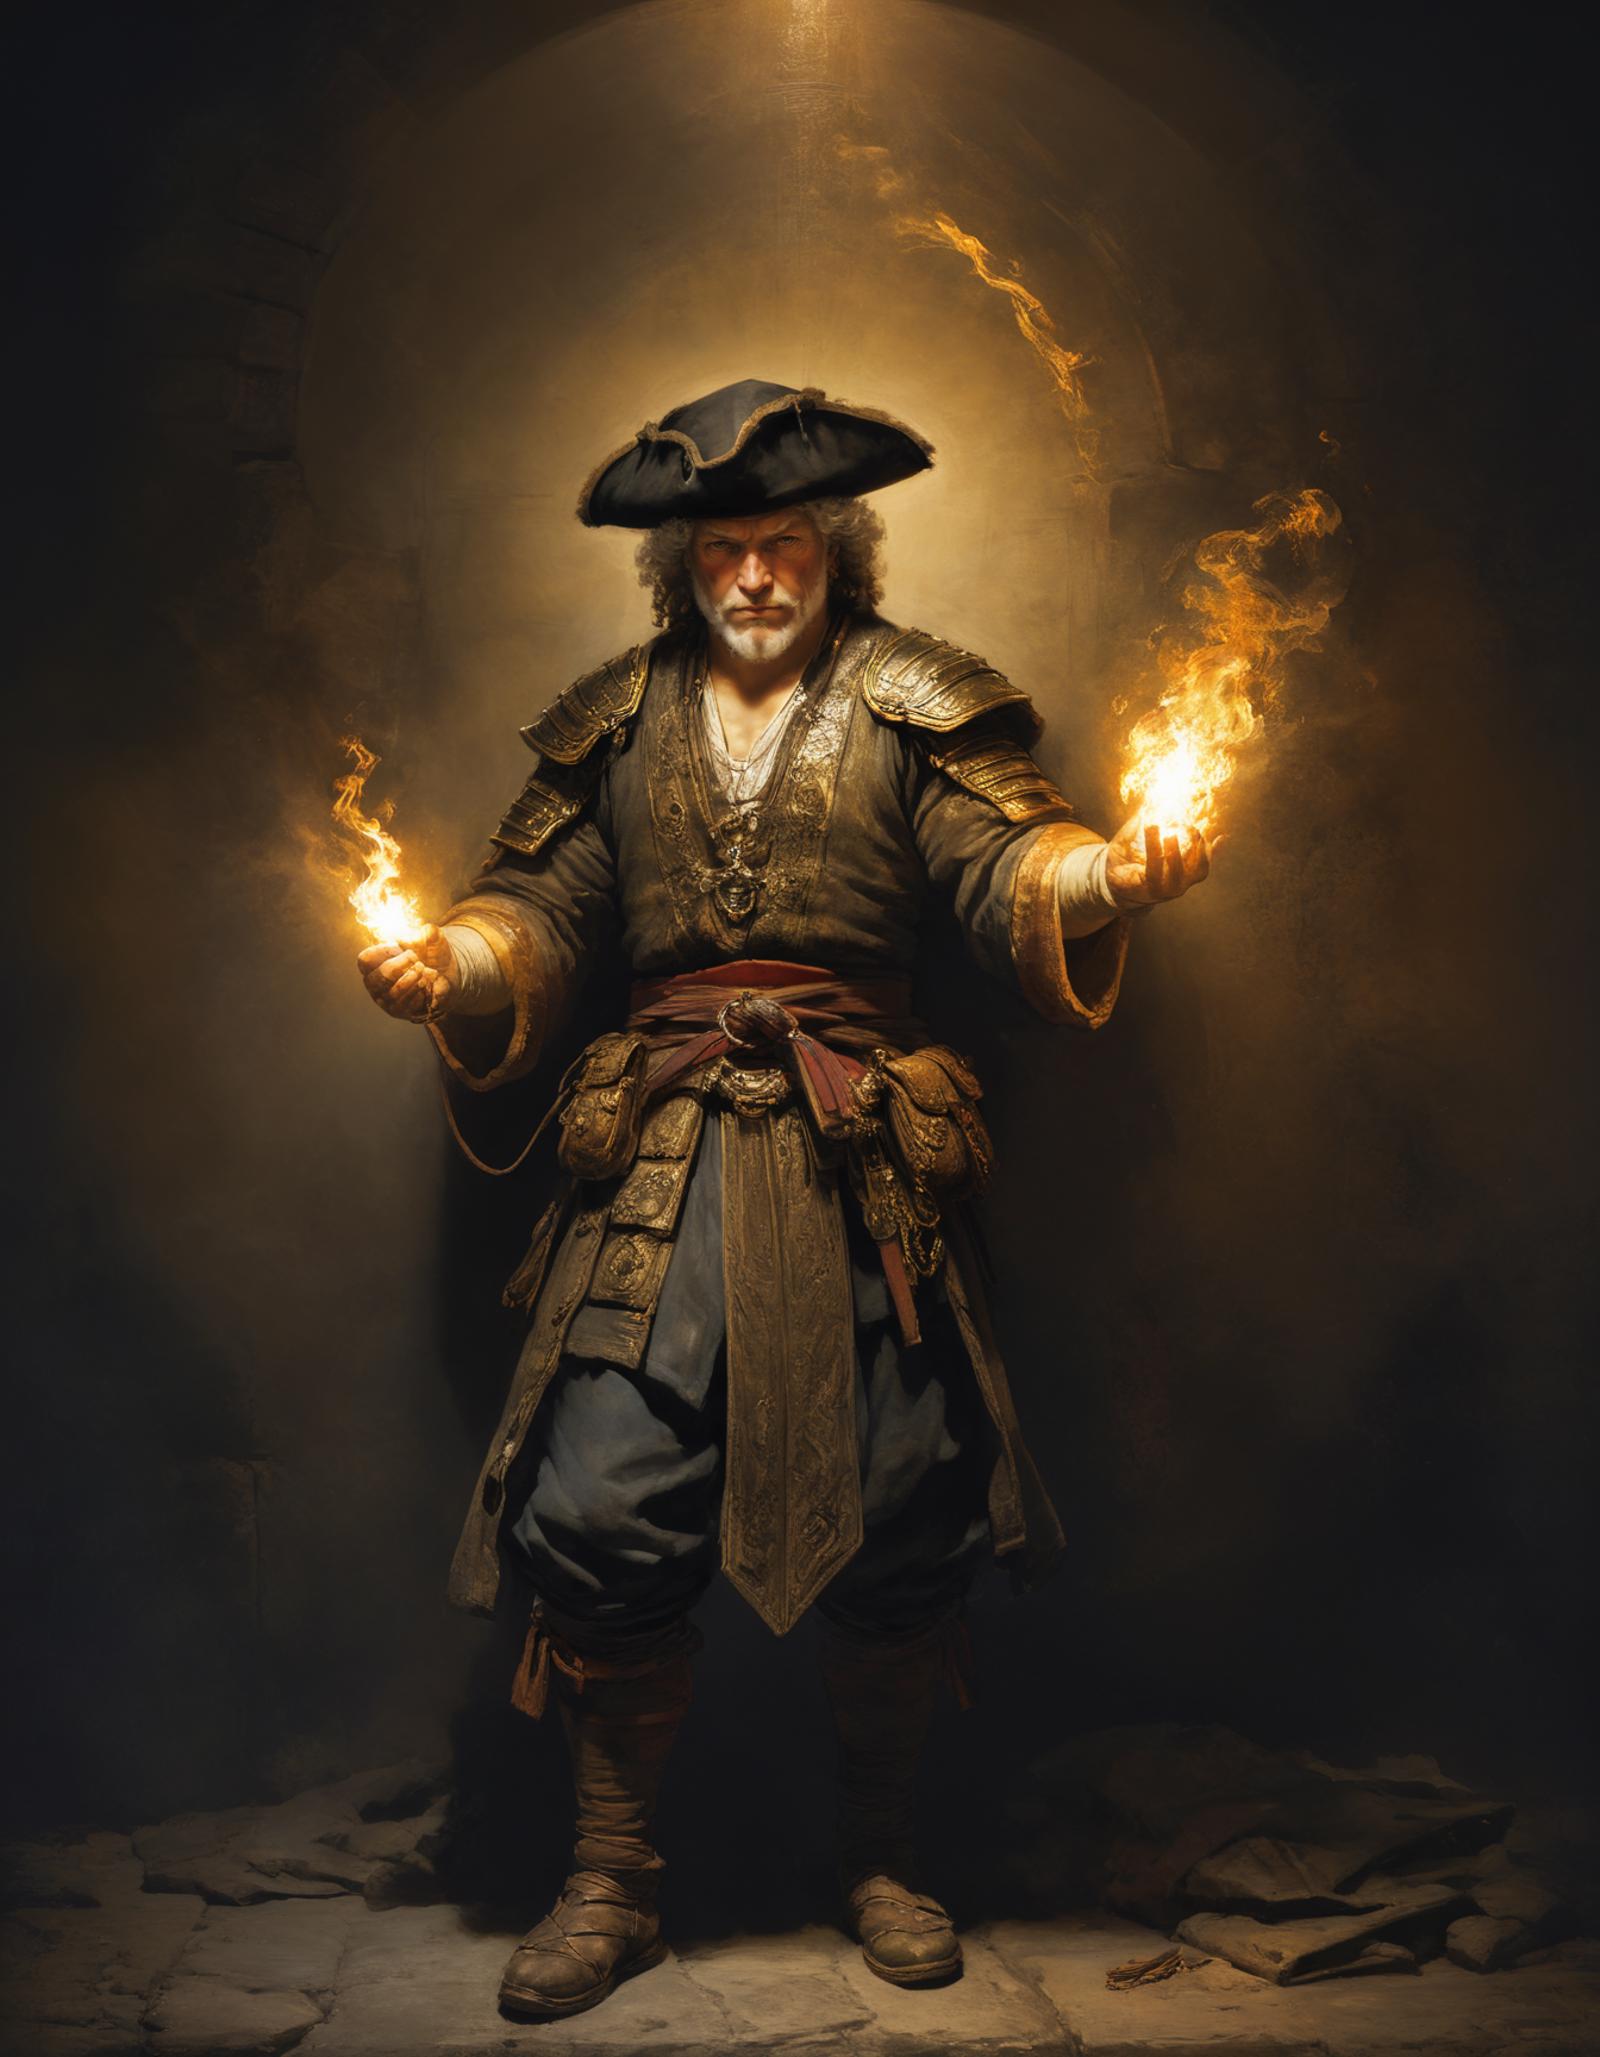 Man in pirate costume holding flaming torches in his hands.